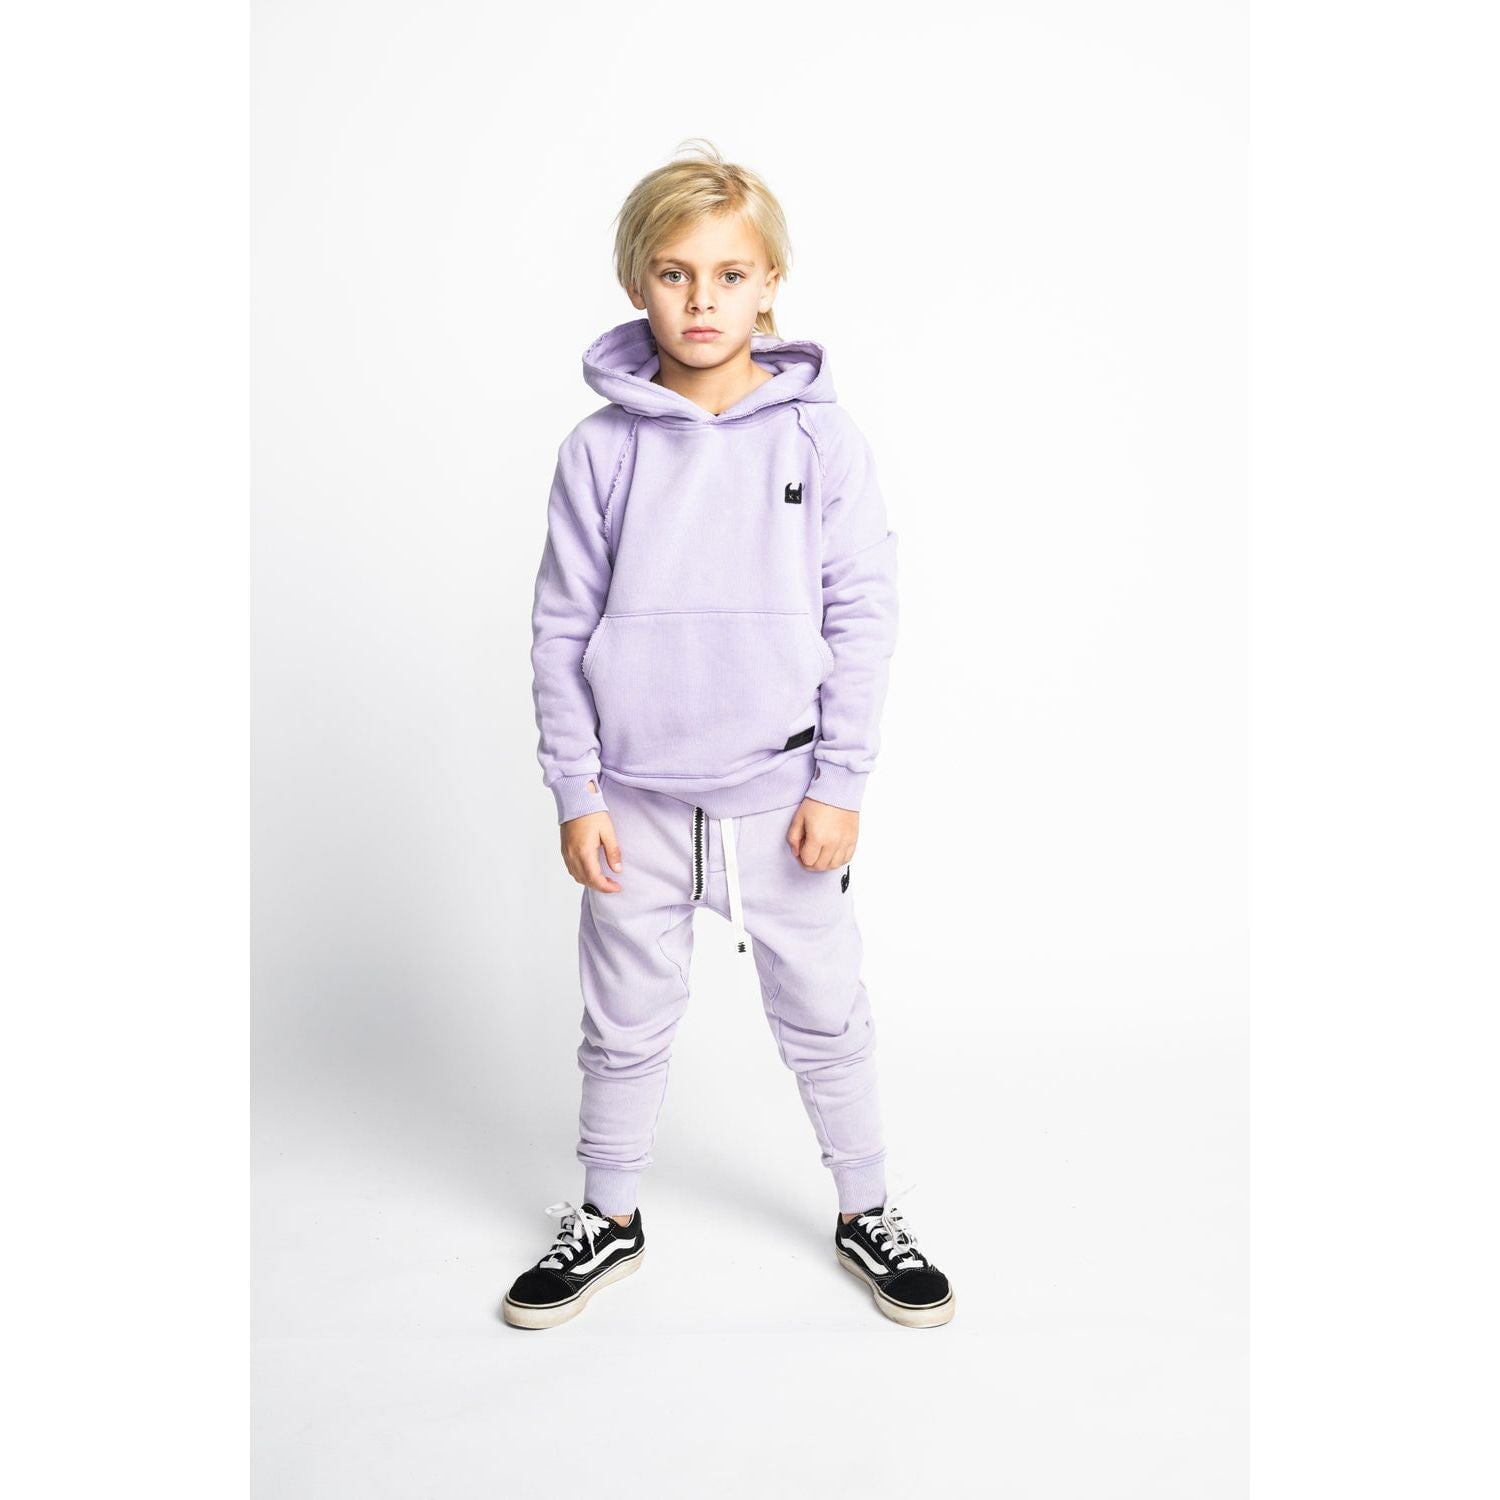 Checkmate Hoody - Mineral Lilac